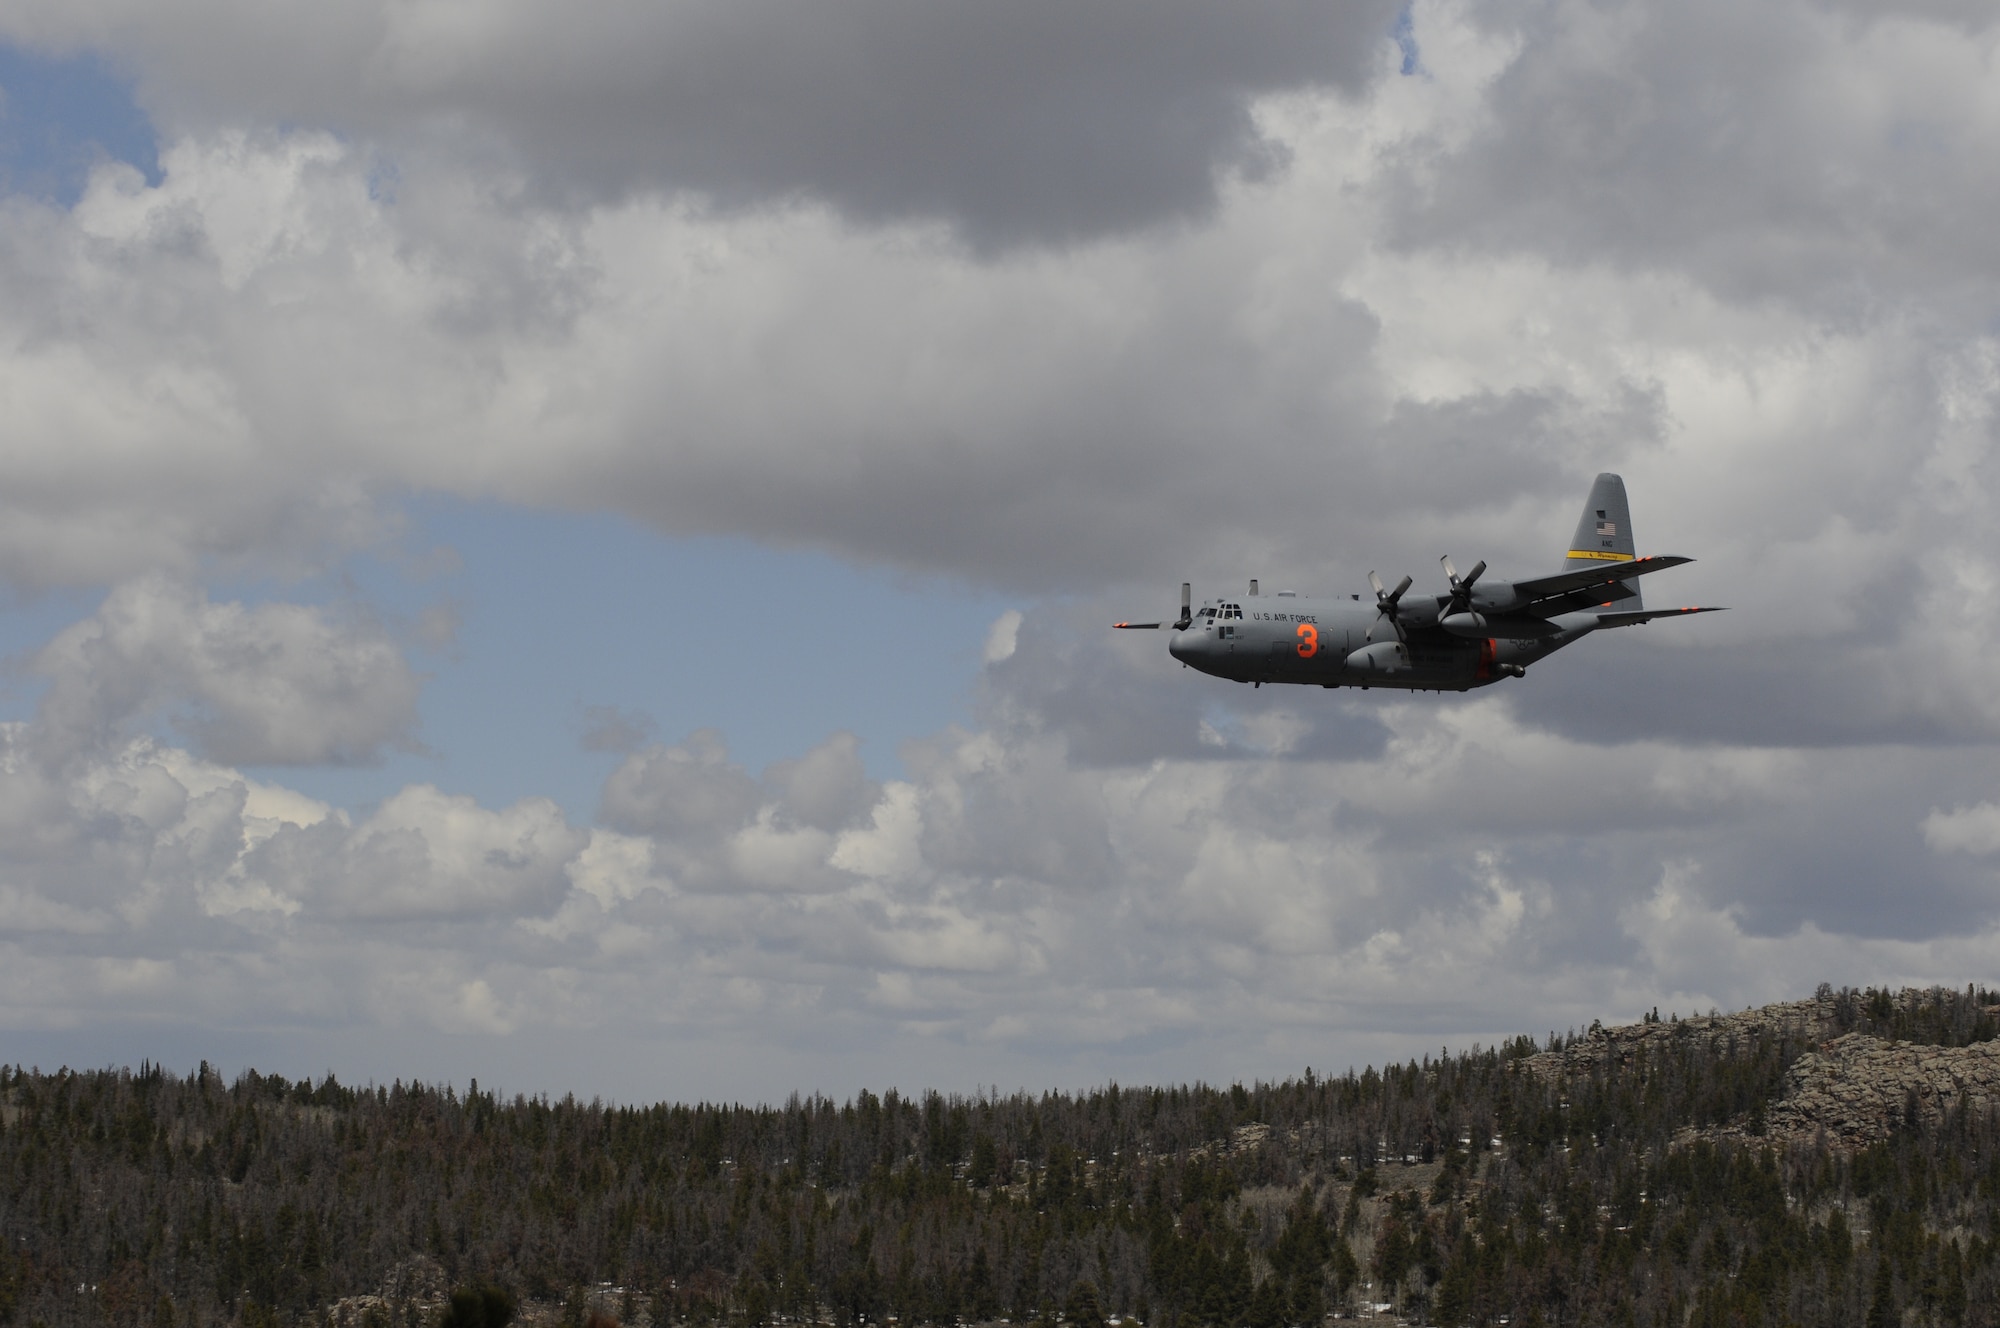 A Modular Airborne Fire Fighting System-equipped C-130 from the 153rd Airlift Wing, after following a U.S. Forest Service lead plane, performs a training mission which includes water drops near the Medicine Bow National Forest, May 10, 2013. The Wyoming Air National Guard's 153rd AW held its annual MAFFS certification and re-certification training. When it is determined MAFFS is needed, the National Interagency Fire Center through U.S. Northern Command requests the Department of Defense's U.S. Air Force resources. (U.S. Air National Guard photo by Capt. Rusty Ridley)